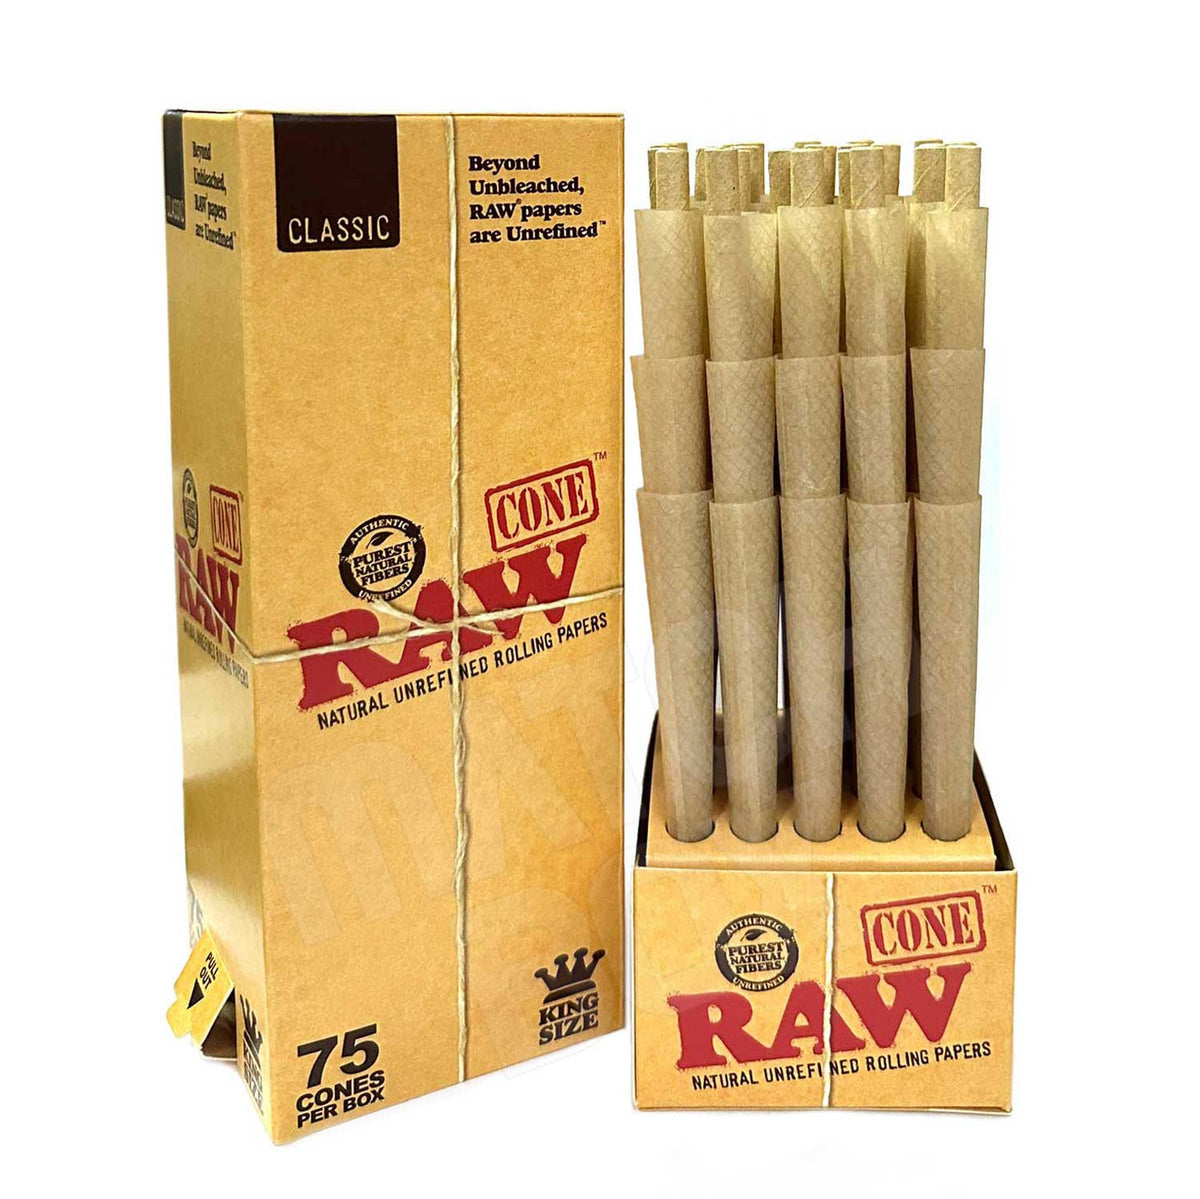 RAW Classic King Size Prerolled Cones 75ct Box – matchboxbros